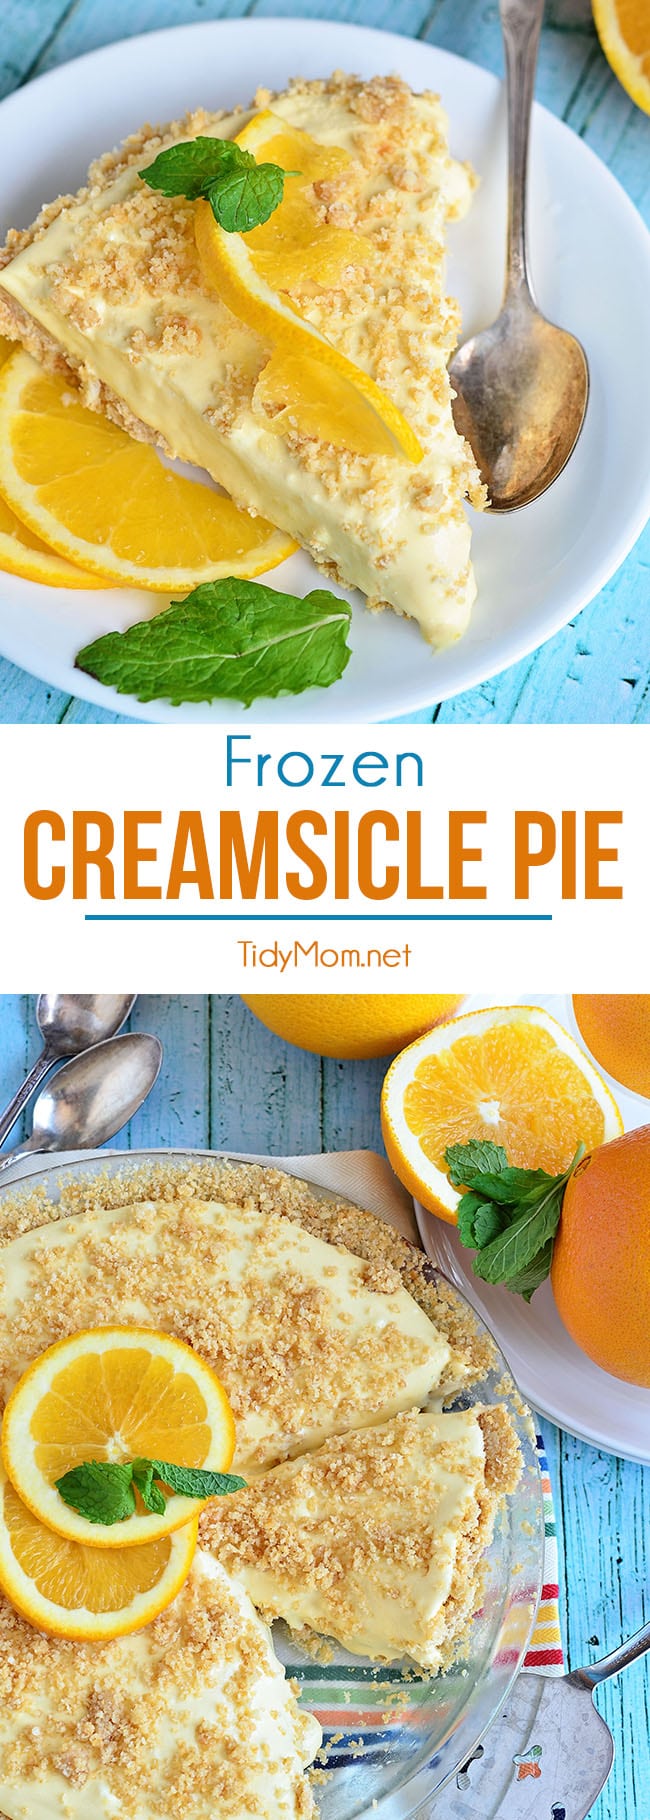 If you are a fan of the ice cream truck classic,orange creamsicles, or dreamsicles, you’re going to love this Frozen Creamsicle Pie. It’s the perfect summer treat. Find the printable recipe at TidyMom.net